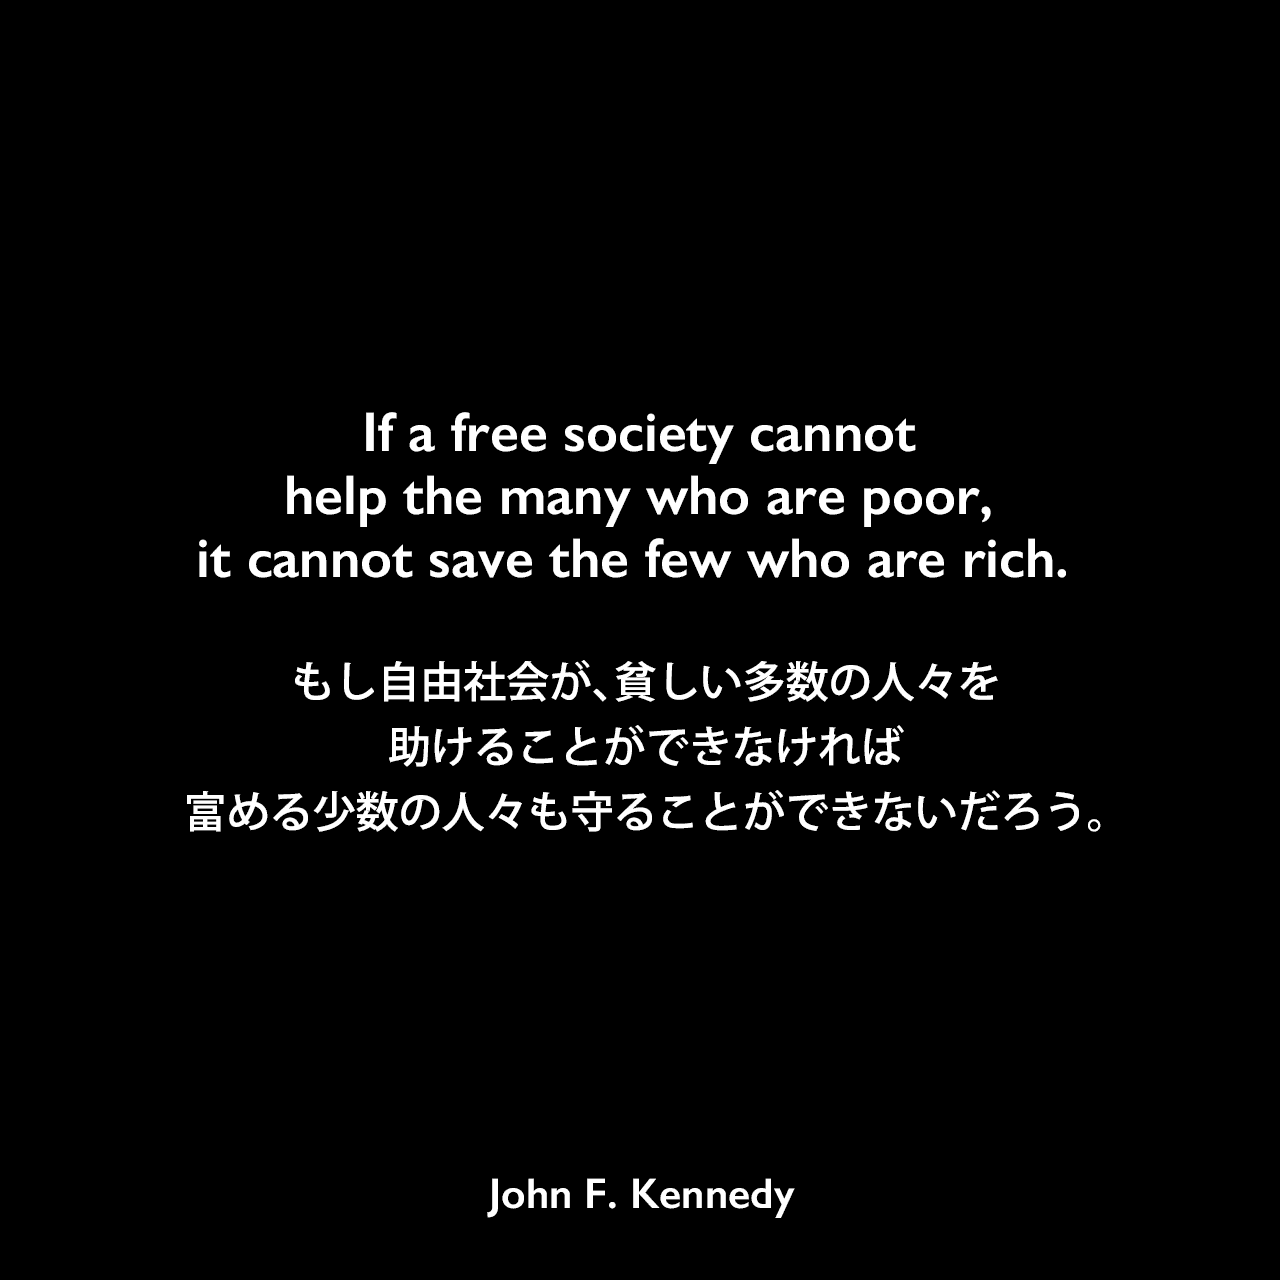 If a free society cannot help the many who are poor, it cannot save the few who are rich.もし自由社会が、貧しい多数の人々を助けることができなければ、富める少数の人々も守ることができないだろう。- 1961年1月20日の大統領就任演説よりJohn F Kennedy